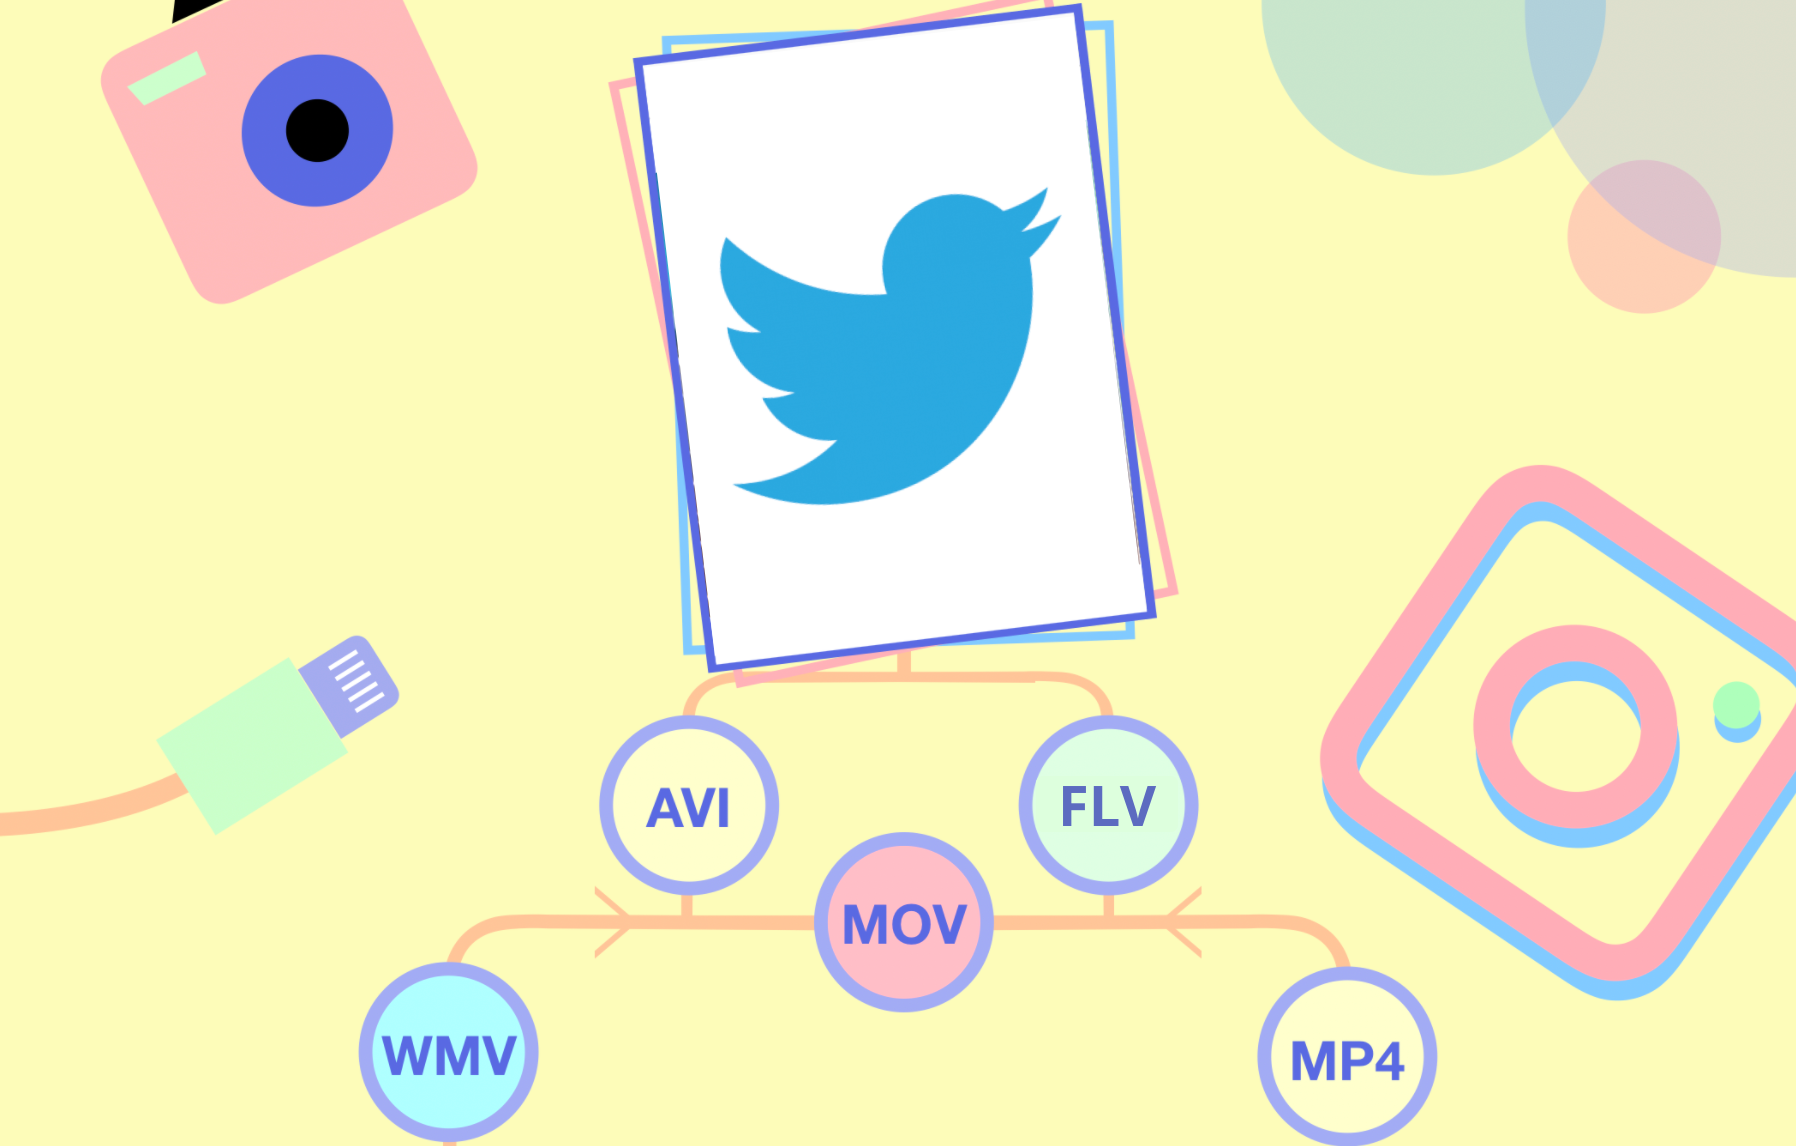 How to Post FLV and AVI Videos on Twitter